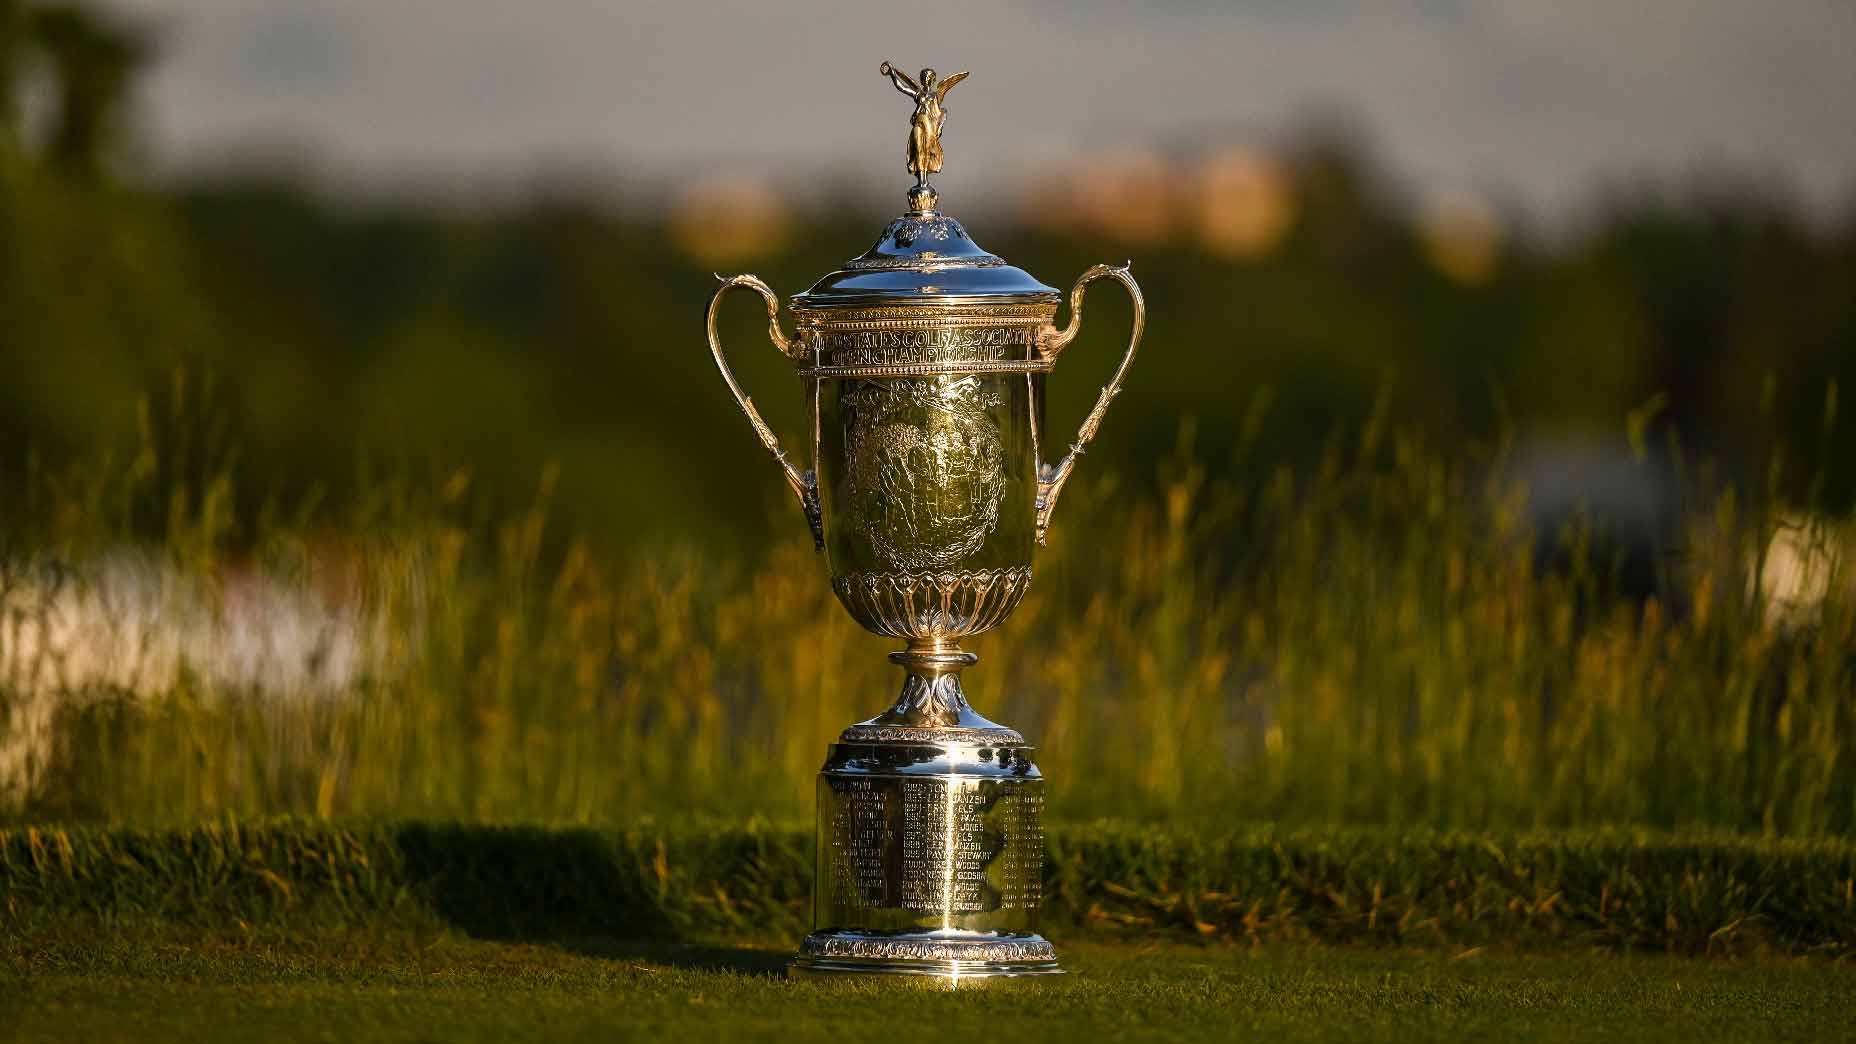 2023 U.S. Open schedule TV times, channel, streaming, dates and more